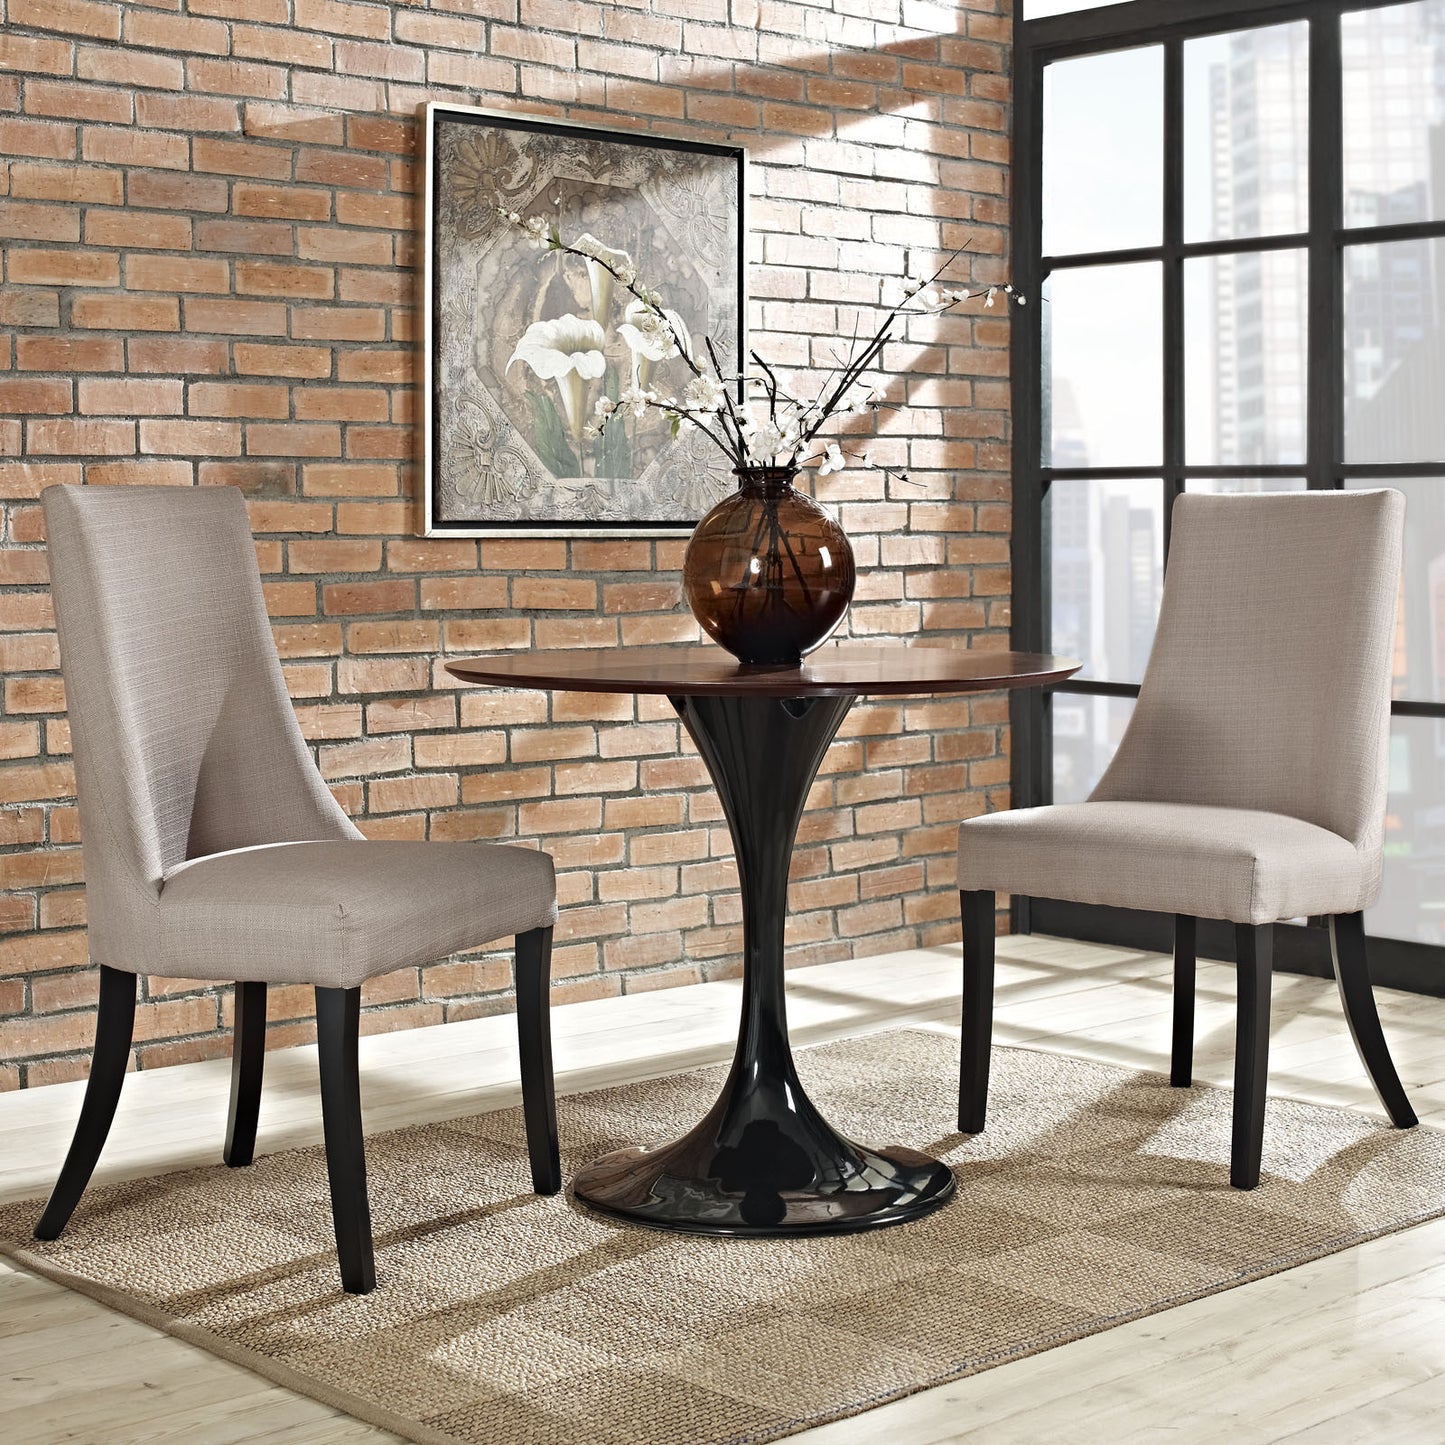 Muse Dining Side Chair Set of 2 - living-essentials